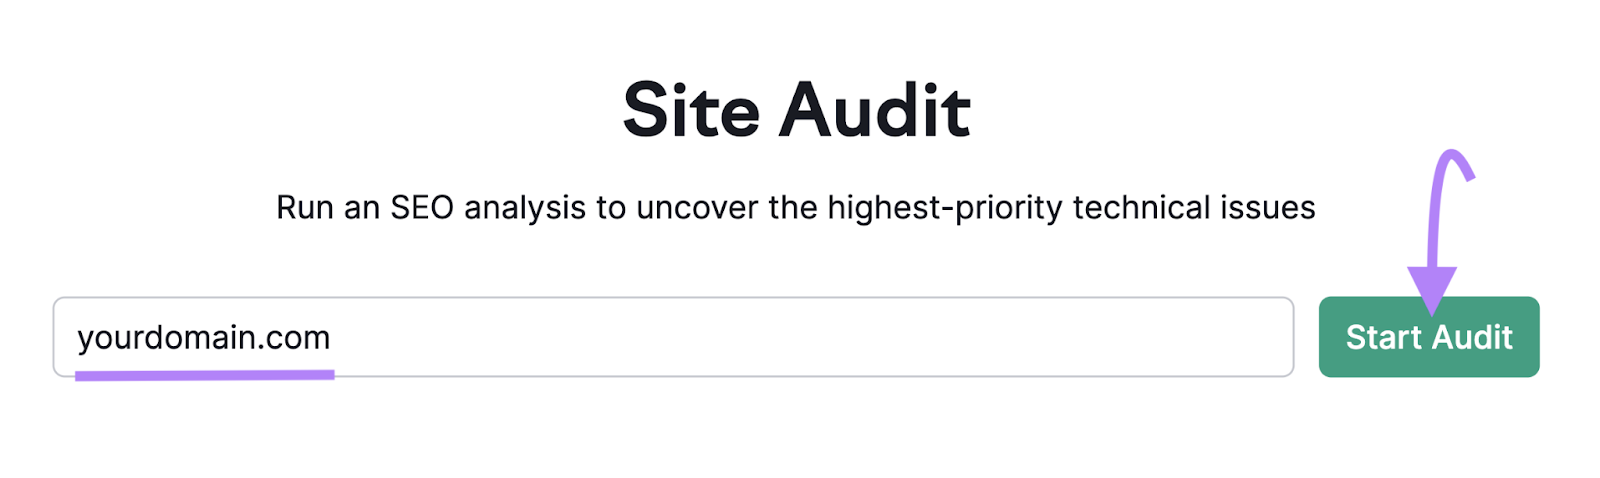 Site Audit tool search for "yourdomain.com"